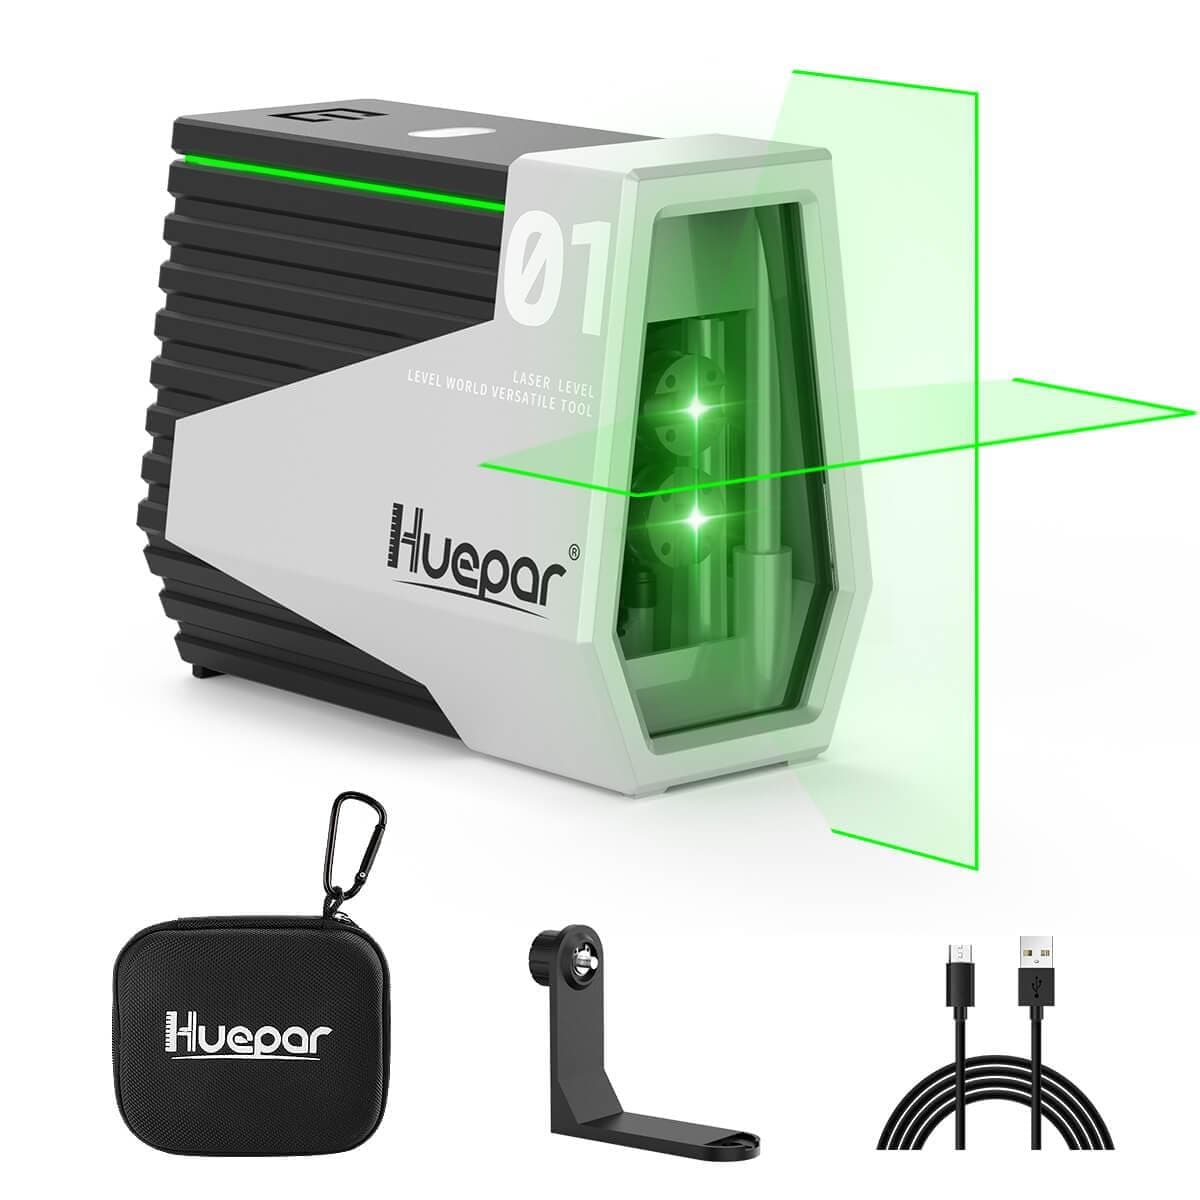 Huepar Cross Line Laser Level Green Beam Self-Leveling Laser Level Tools  for Home DIY Picture Hanging with 360° Magnetic Pivoting Base 9011G 